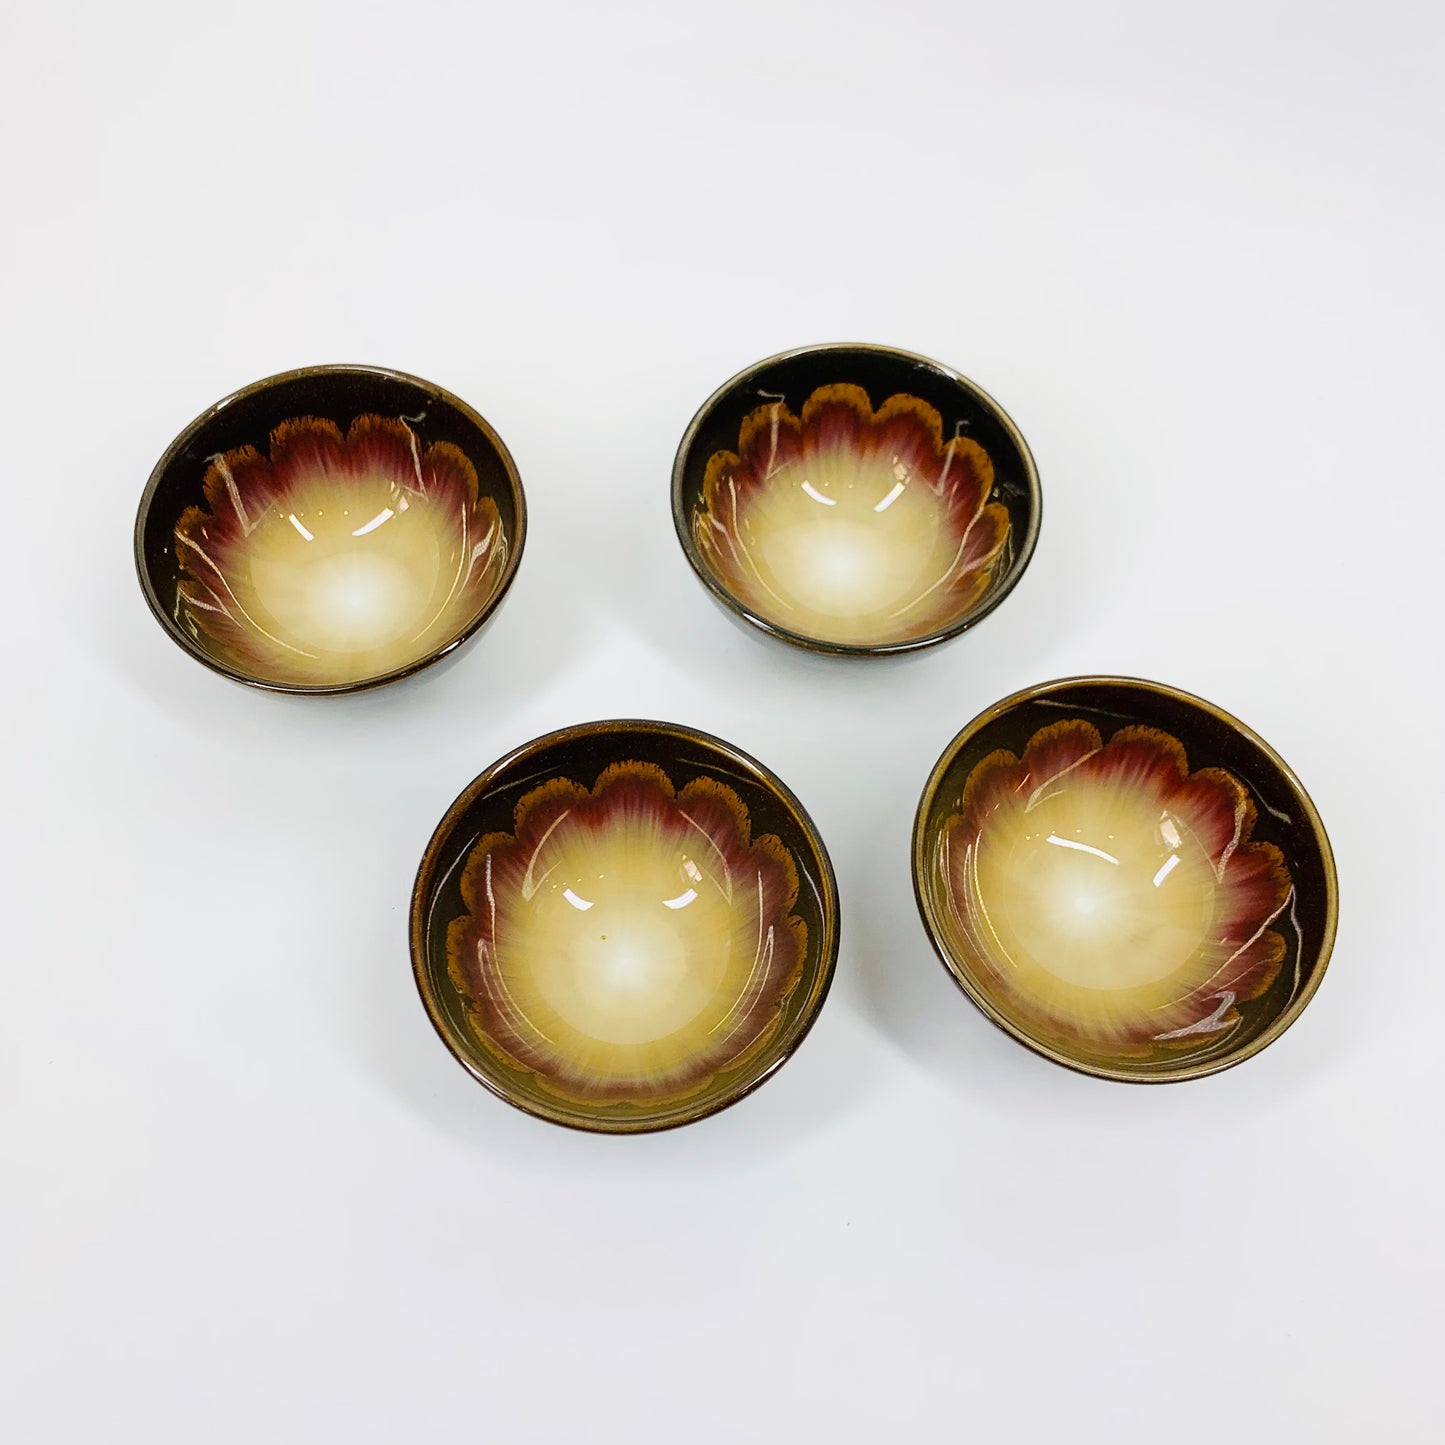 Vintage hand crafted Japanese mini pottery sauce bowl